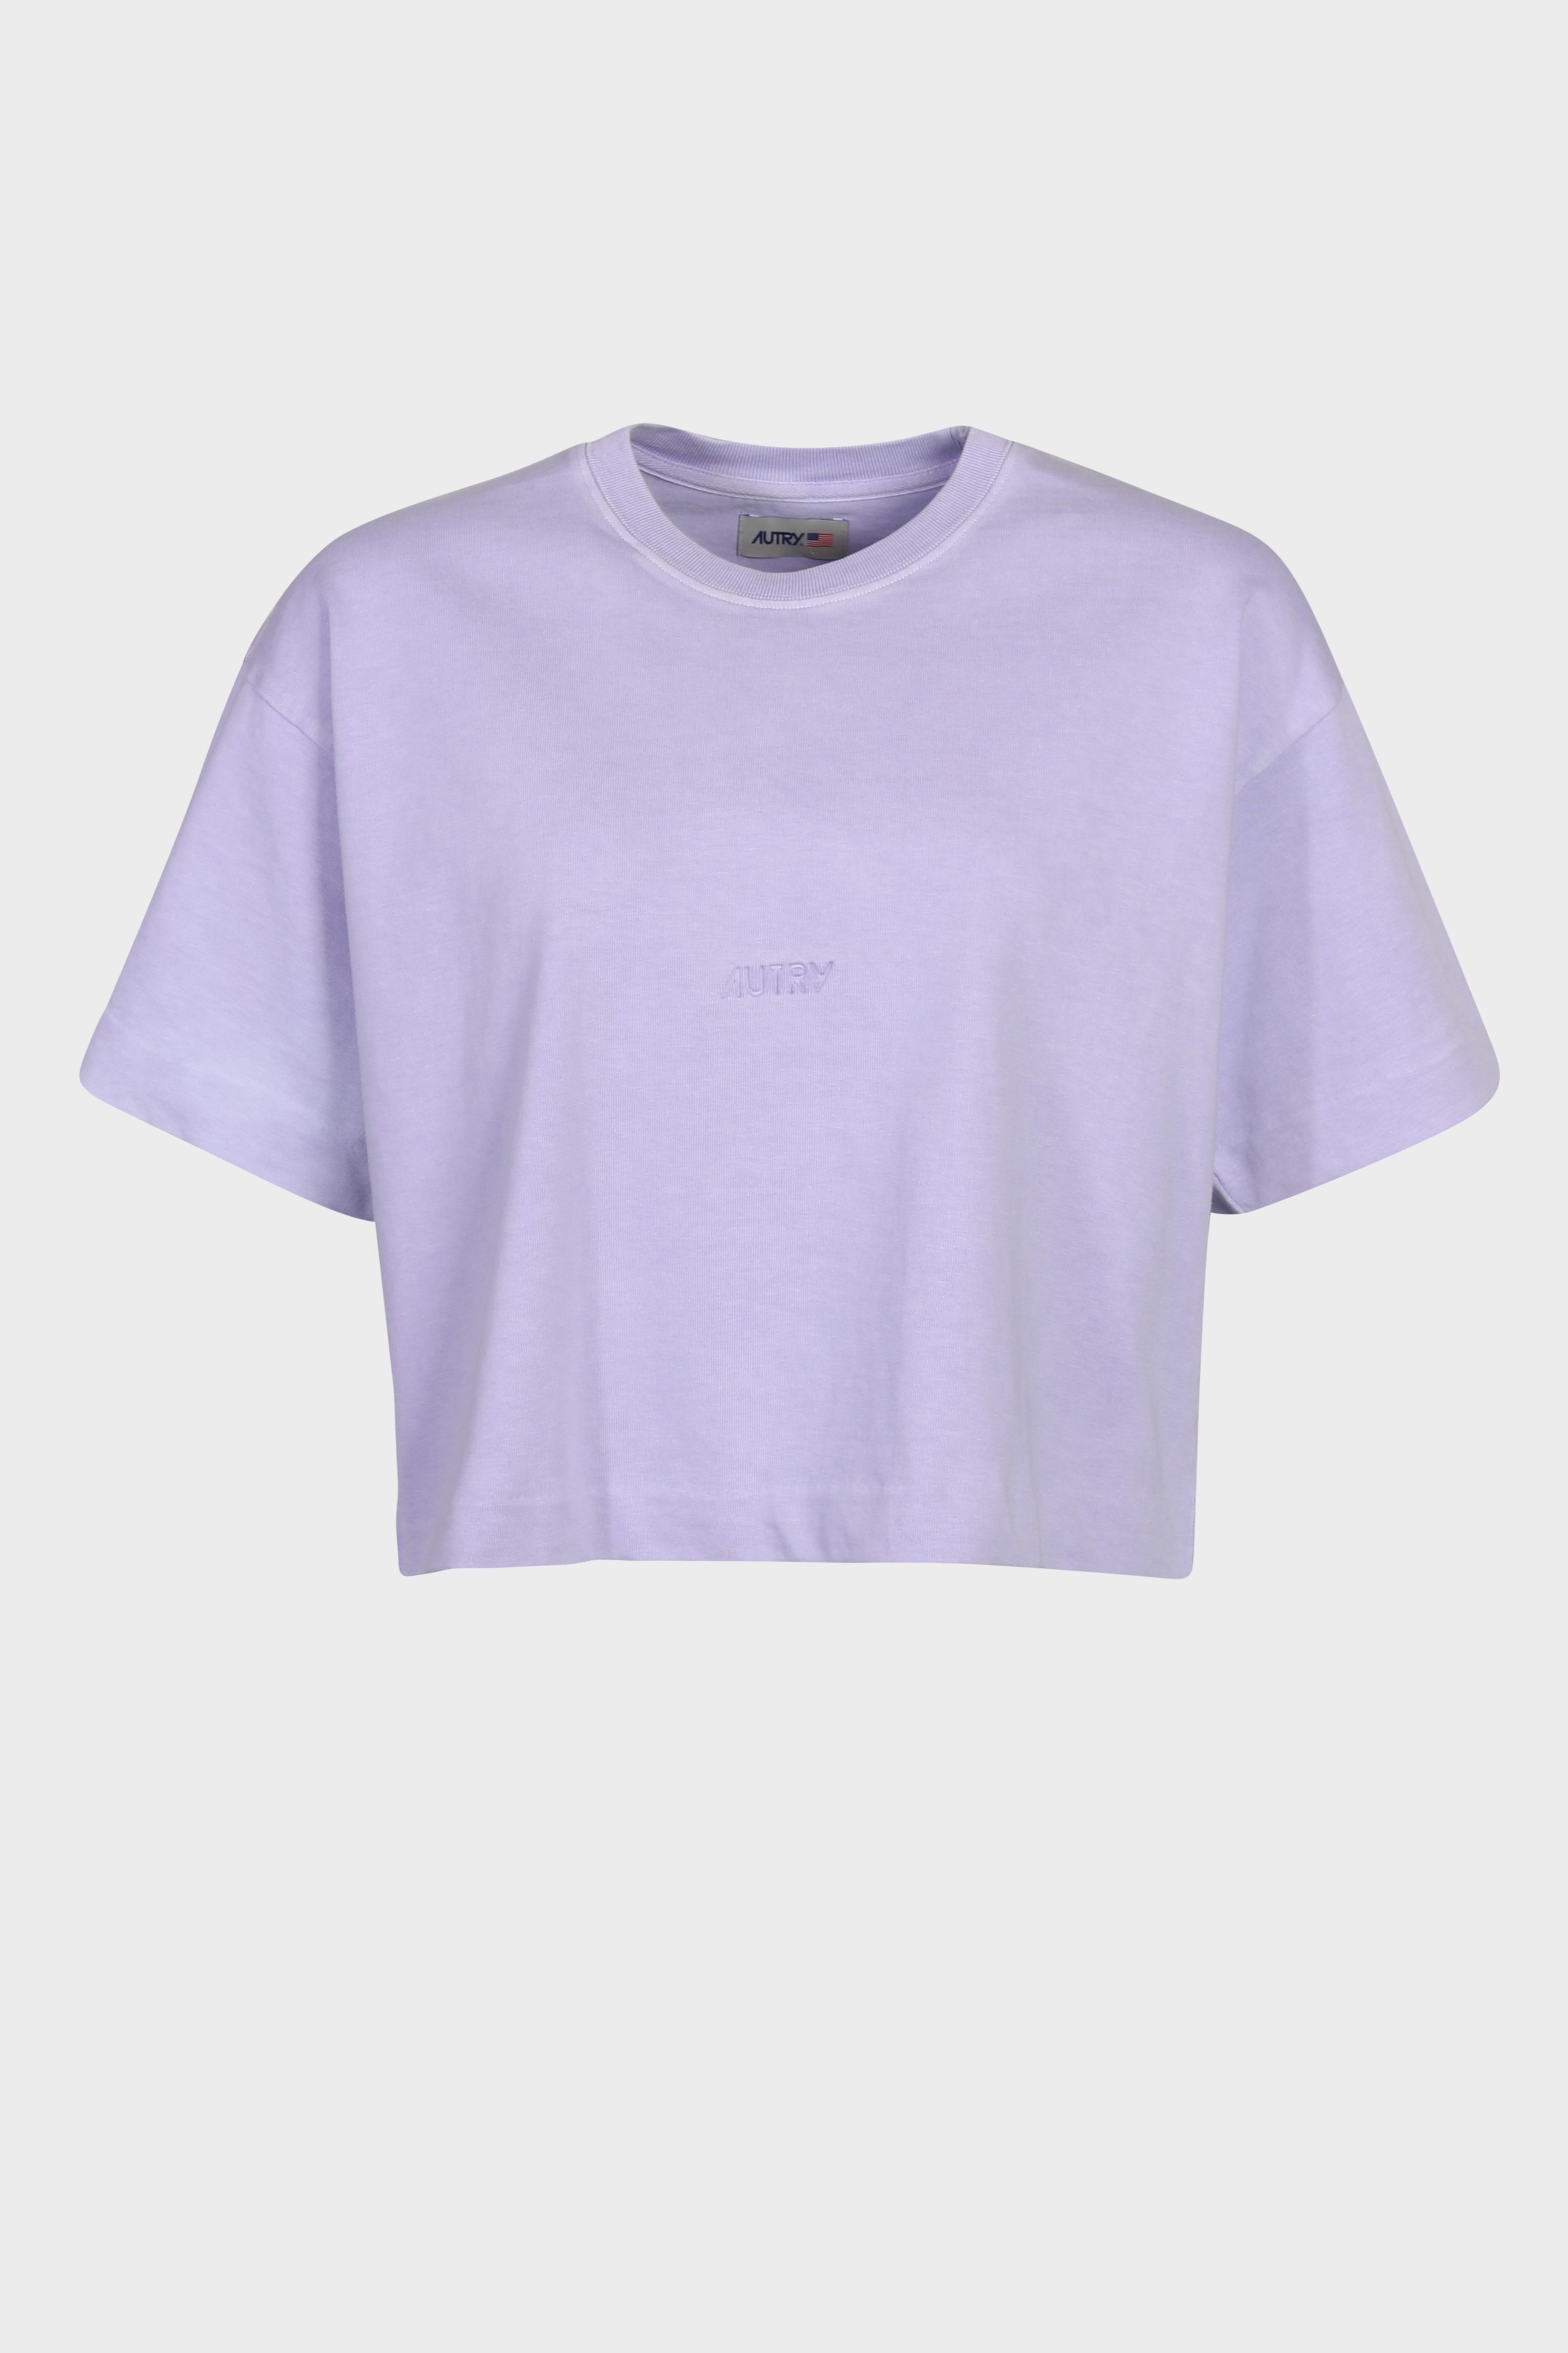 AUTRY ACTION PEOPLE Apparel T-Shirt in Lilac